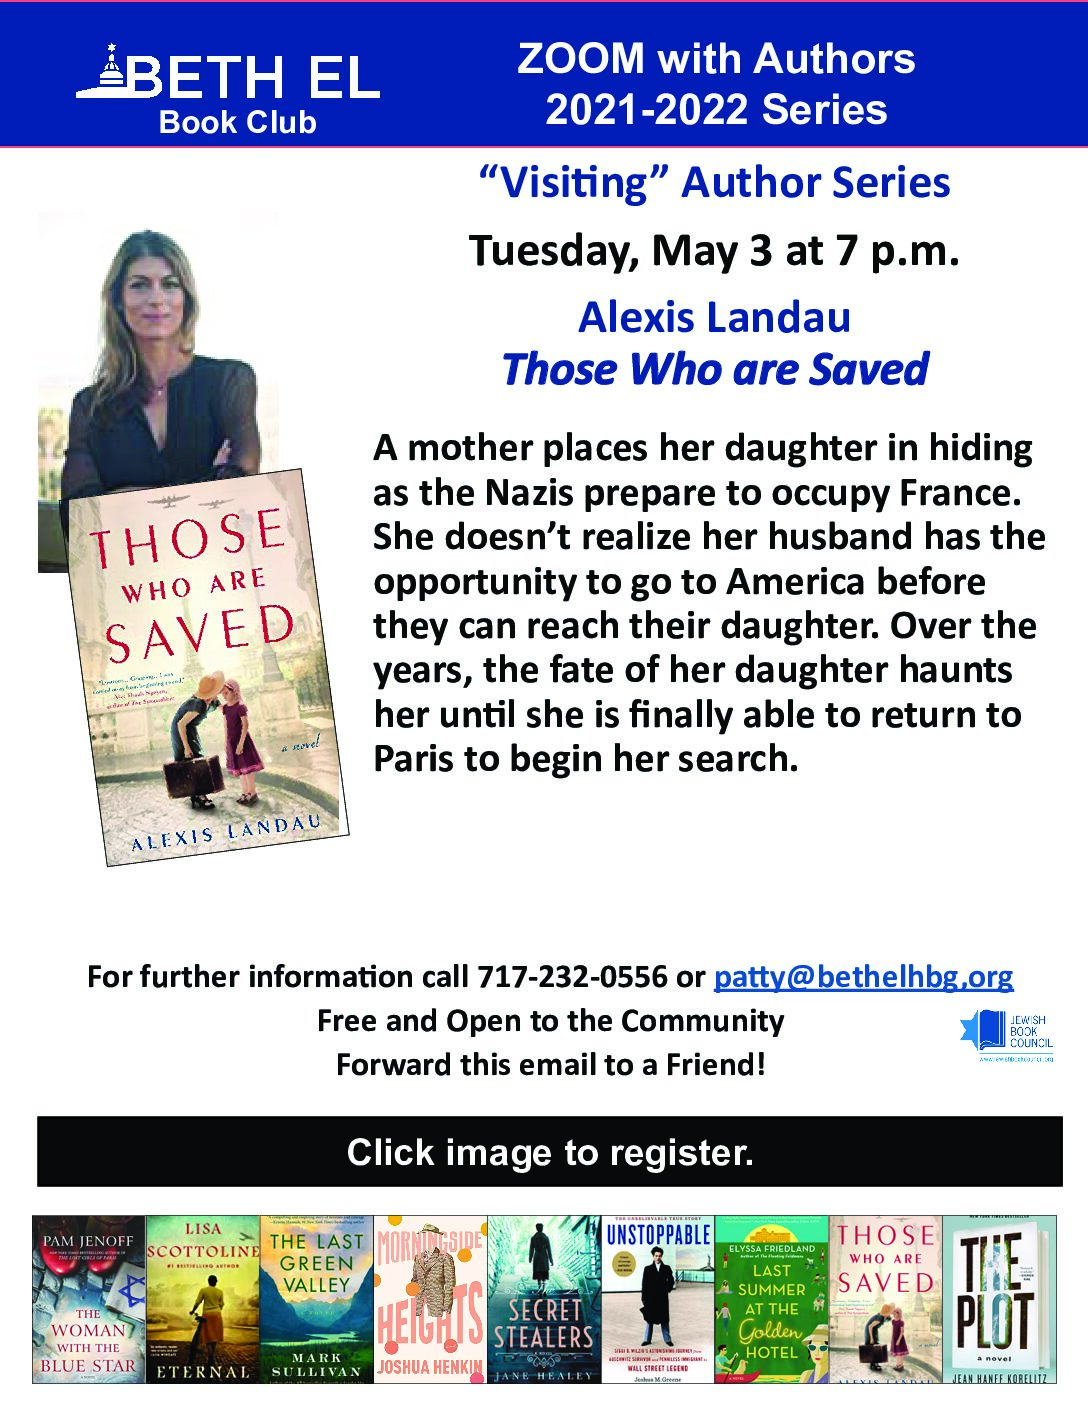 Zoom with the Authors Beth El Book Club - Alexis Landau - Those who Are Saved